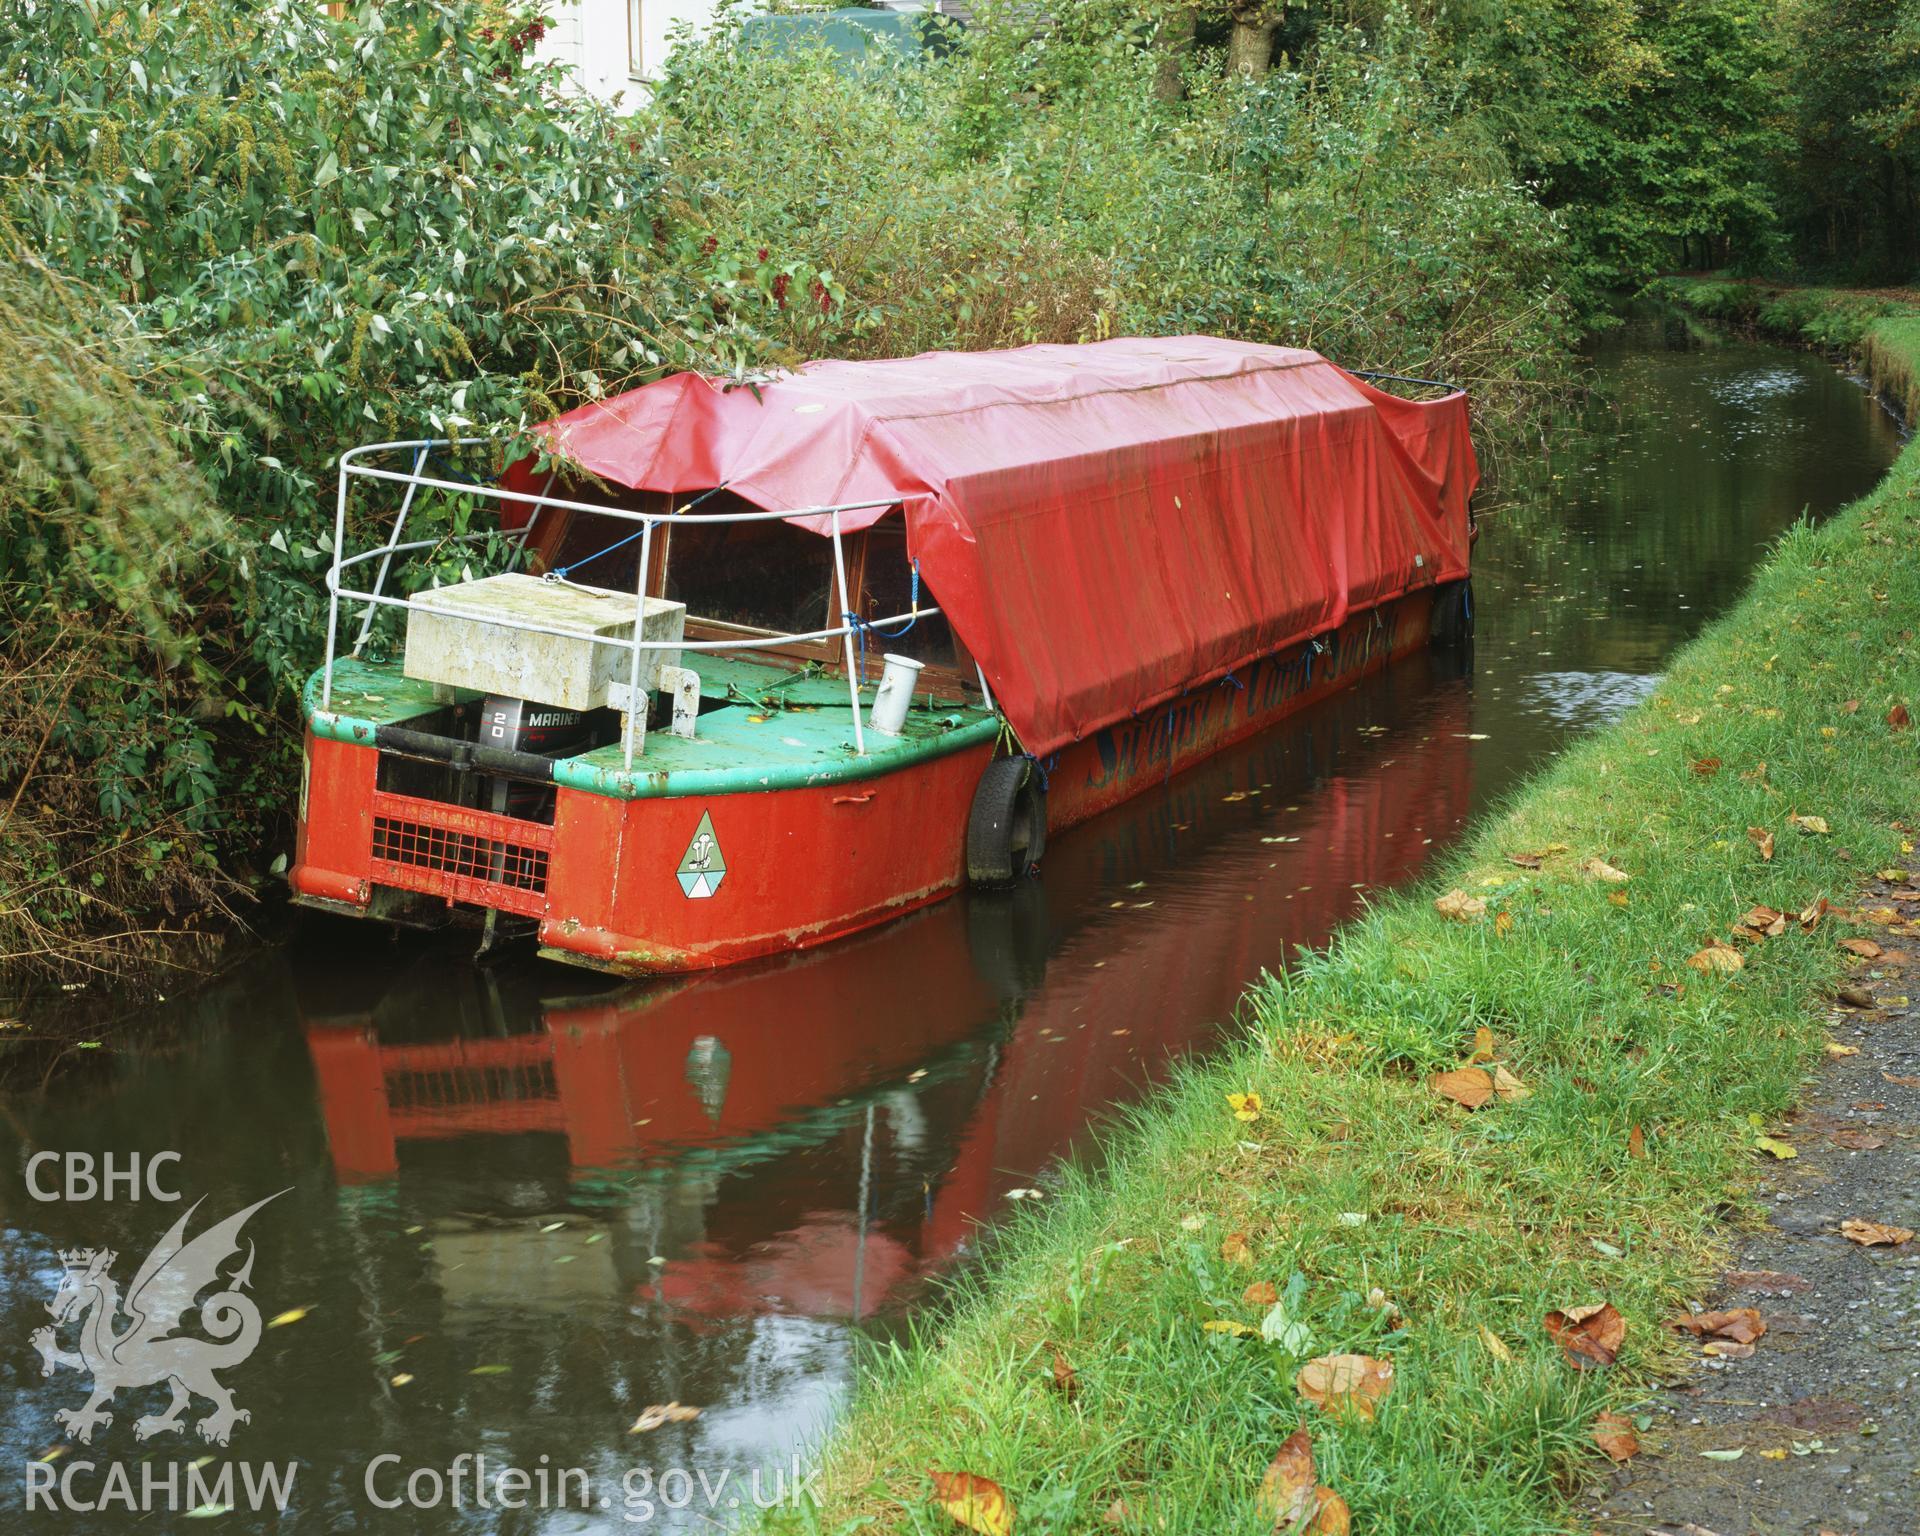 RCAHMW colour transparency showing  view of the canal barge, Papa Thomas, taken by I.N. Wright, October 2005.